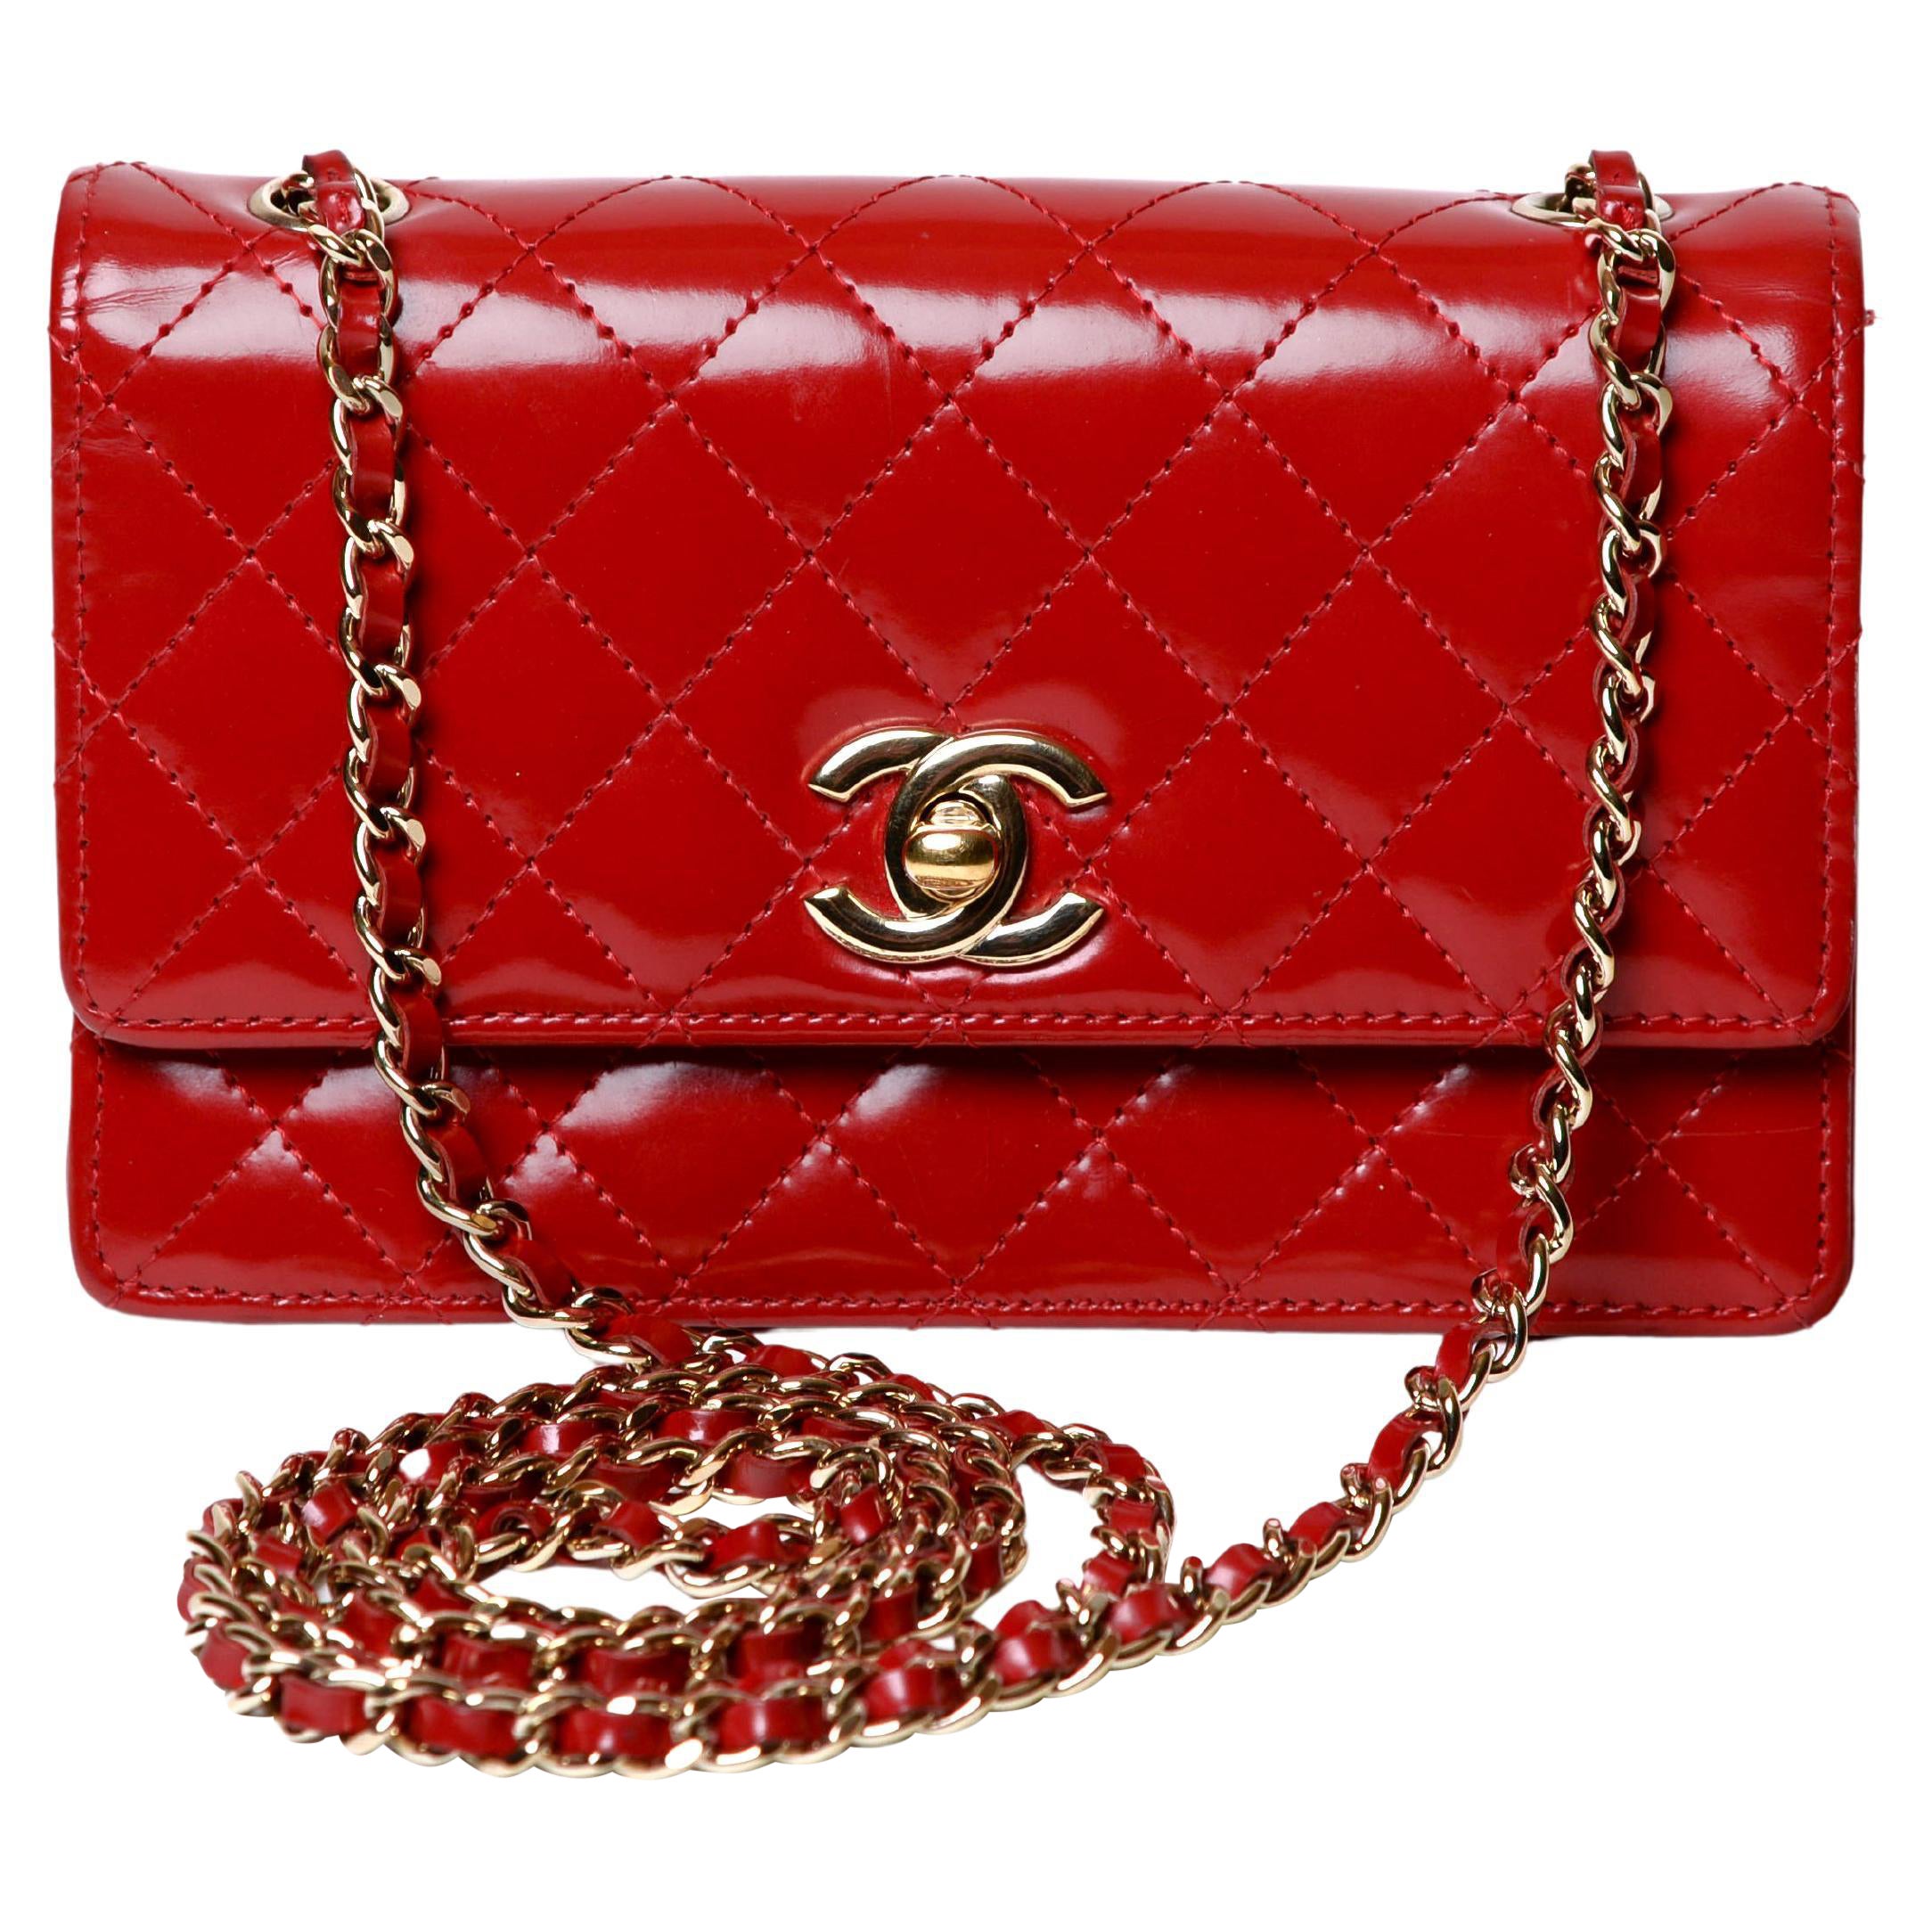 Chanel Classic Red Mini Flap Bag Patent Leather For Sale